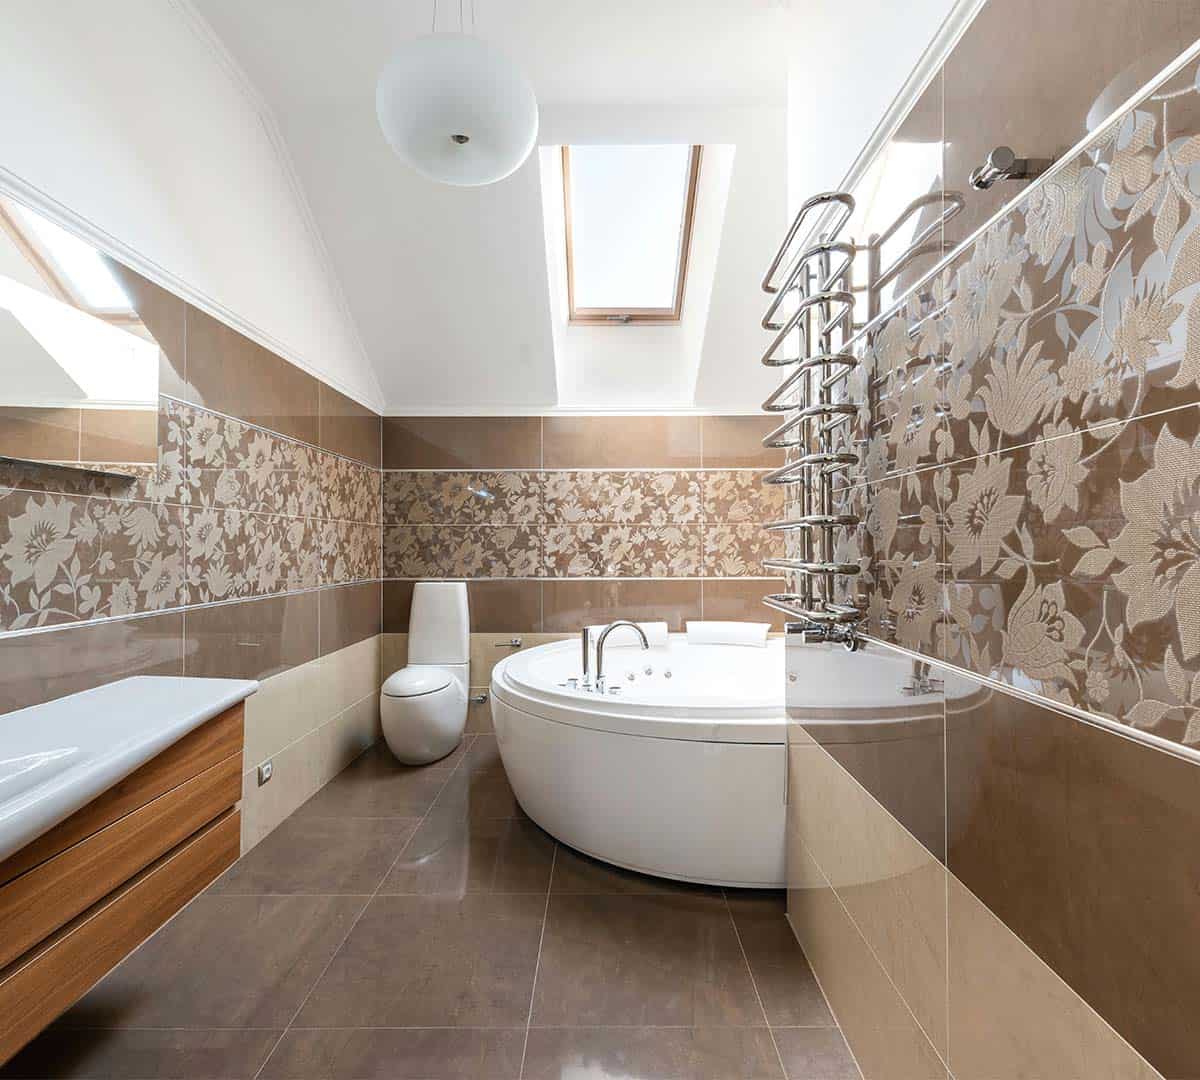 a latest designed bathroom with flowered tiles and brown floor, featuring a bathtub and commode